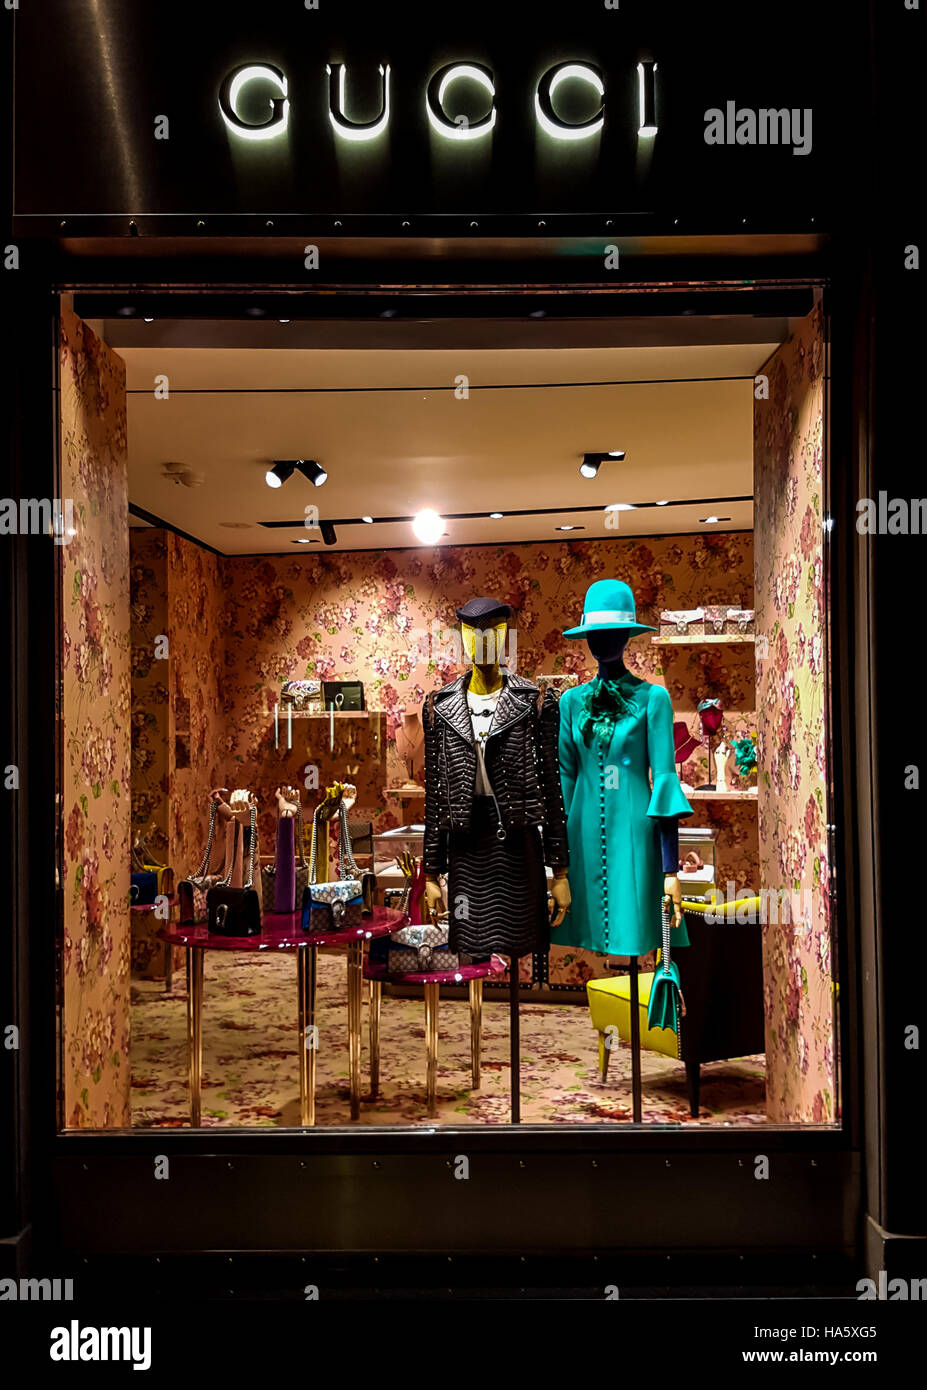 Gucci luxury bags, clothes and shoes sit displayed for inside a Gucci store in Florence, Italy Stock Photo - Alamy